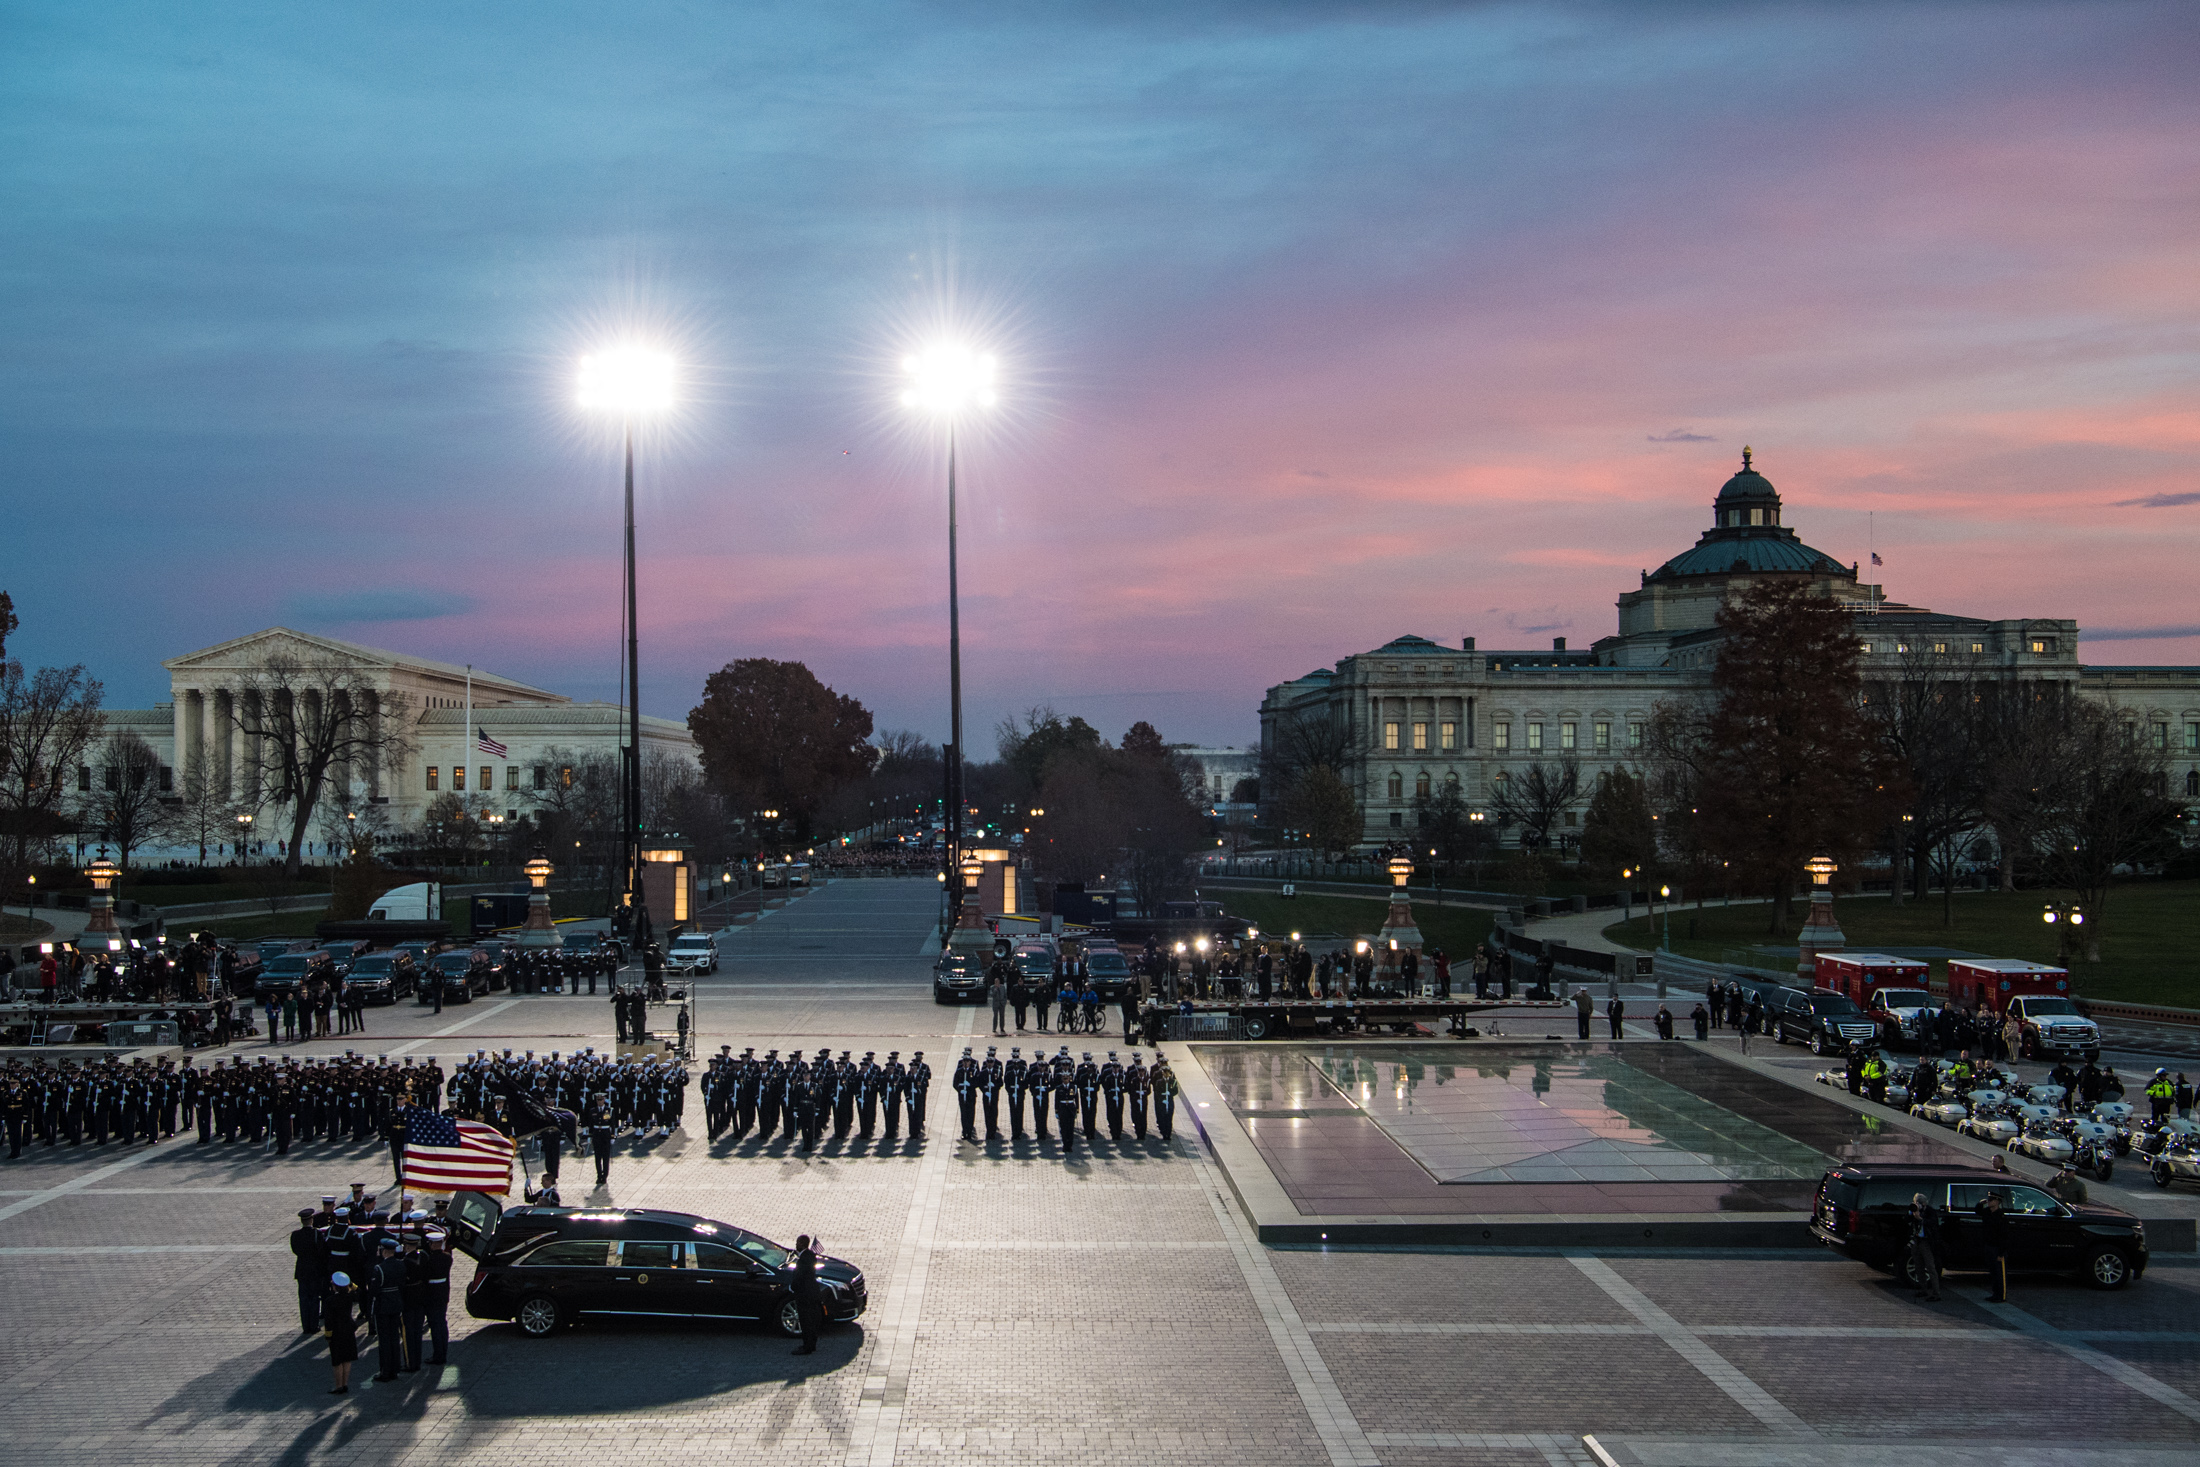 The late President George H.W. Bush arrives at the U.S. Capitol